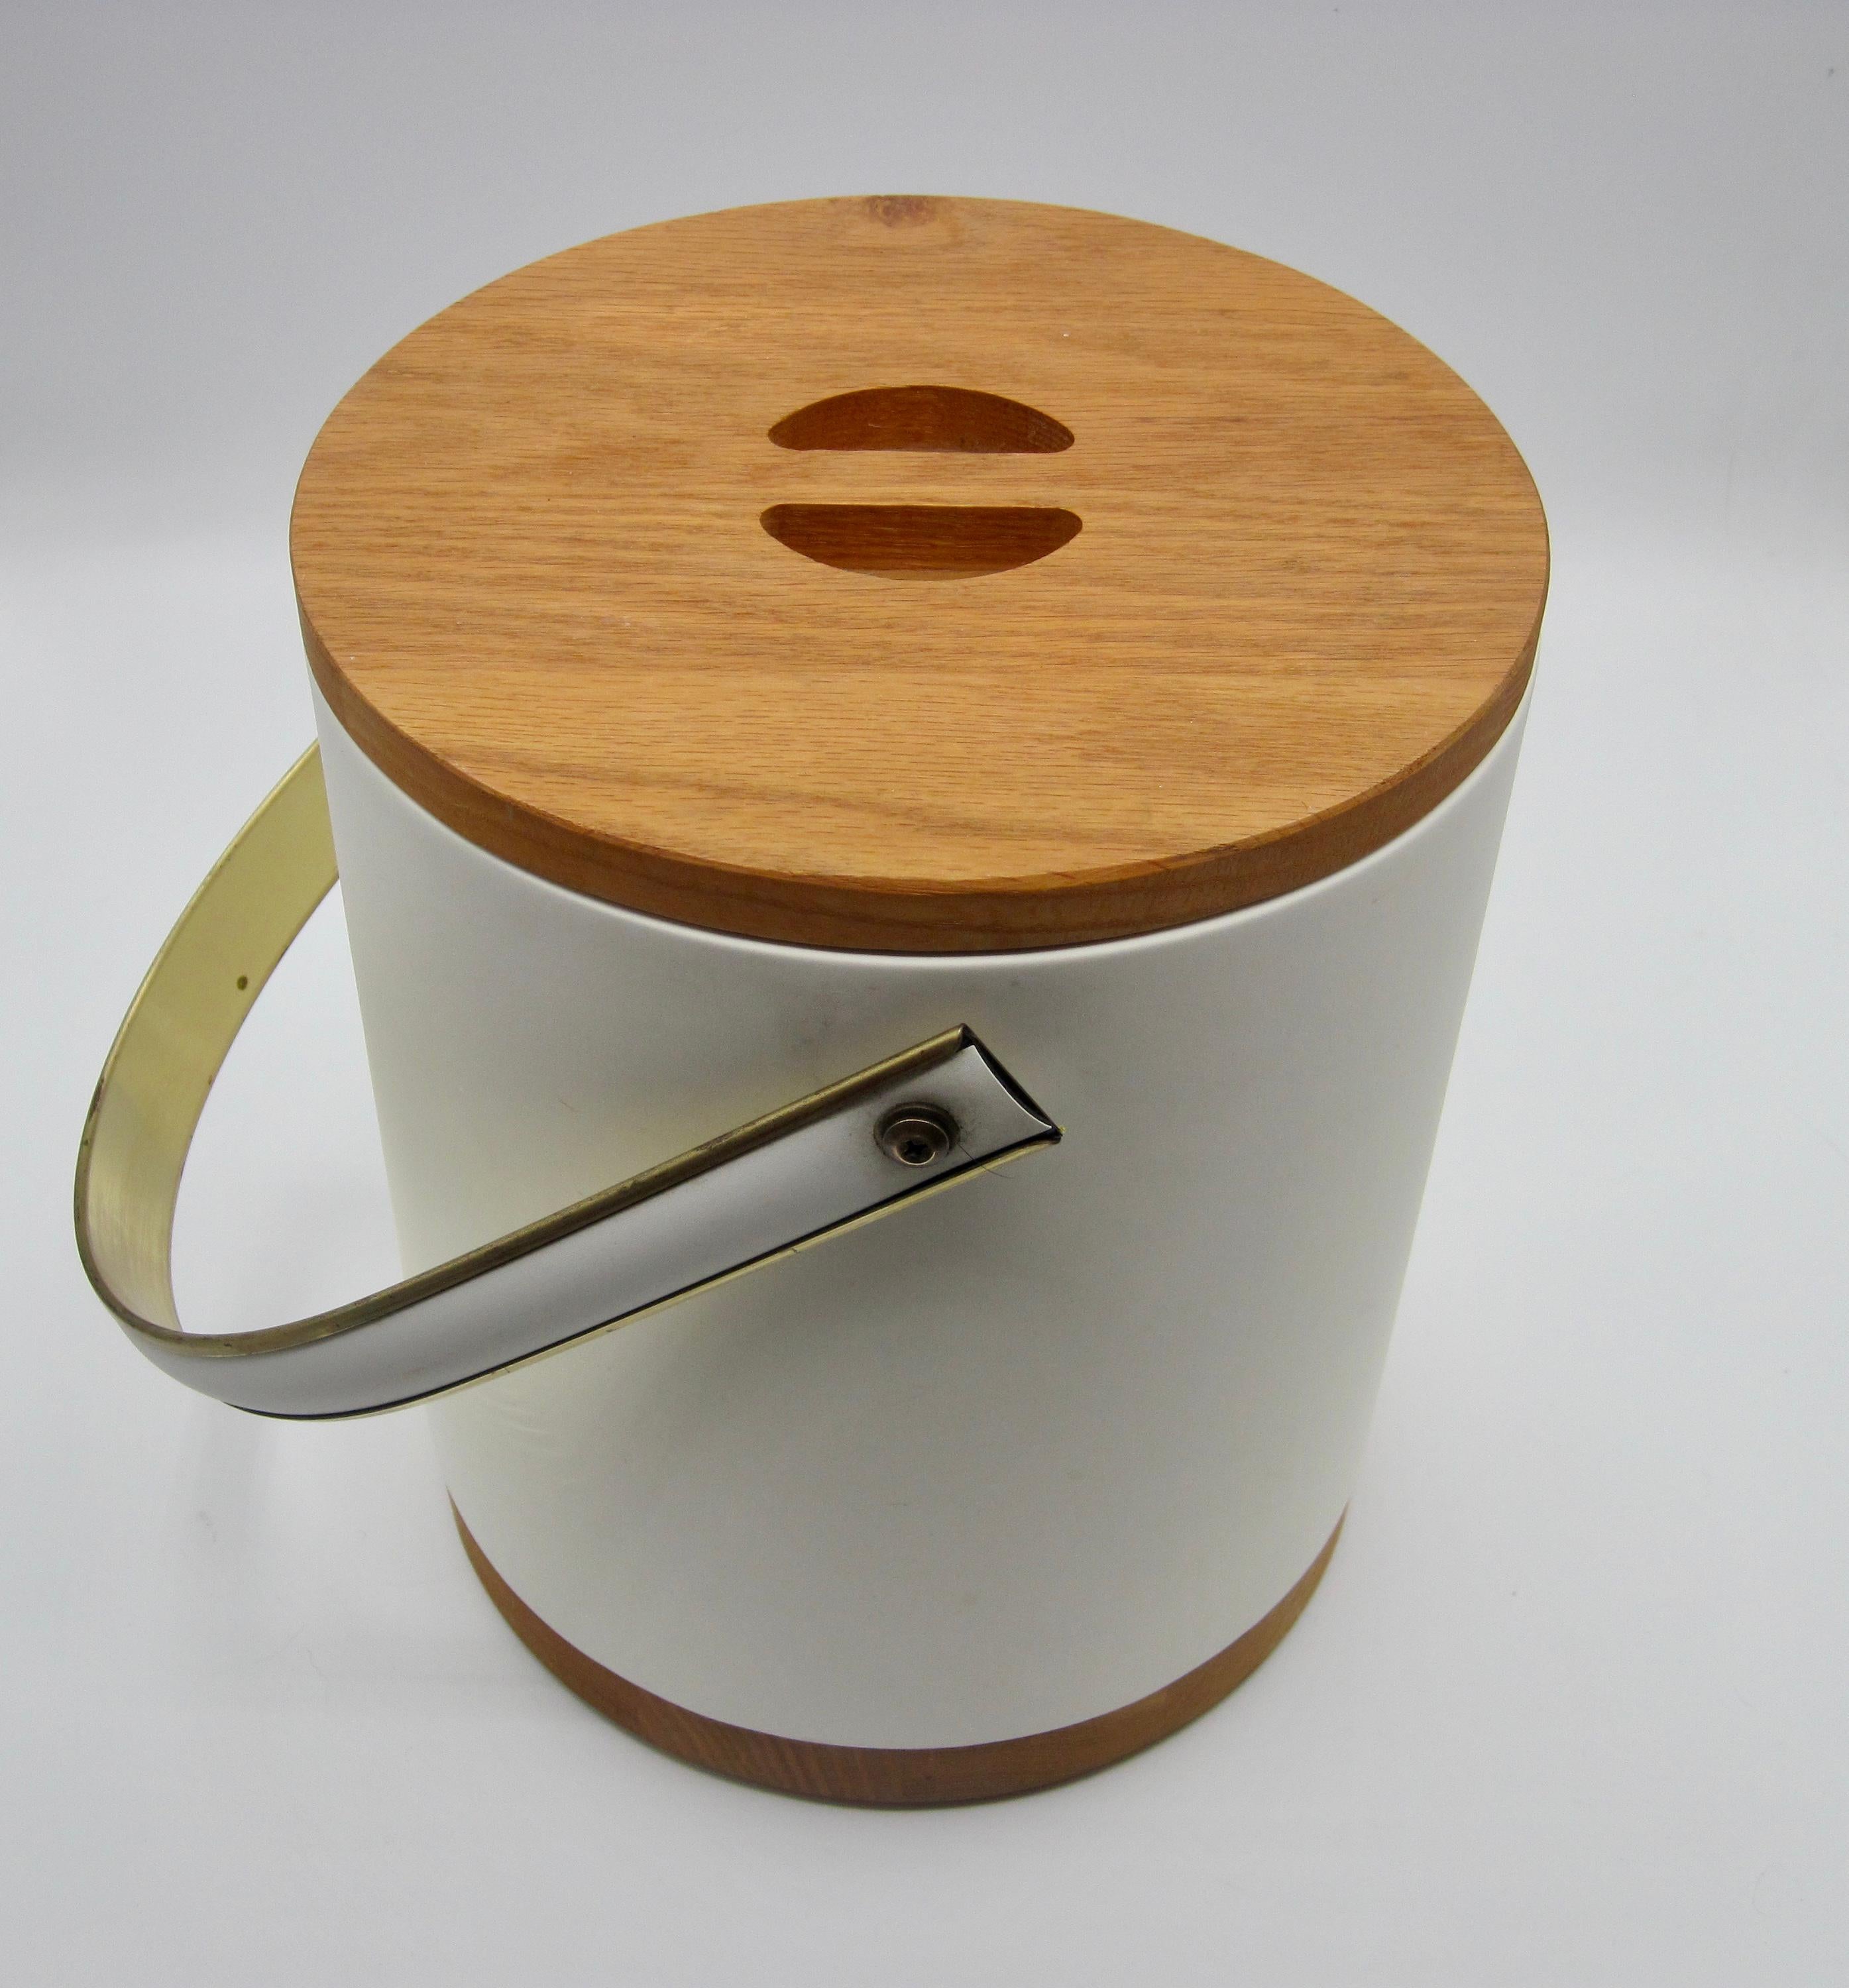 Mid-Century Modern white vinyl covered ice bucket with wood lid and base. From the Bucket Brigade Collection by Morgan and Company. A unique ice bucket in ready to use condition. Please see photos, circa 1960s-1970s.